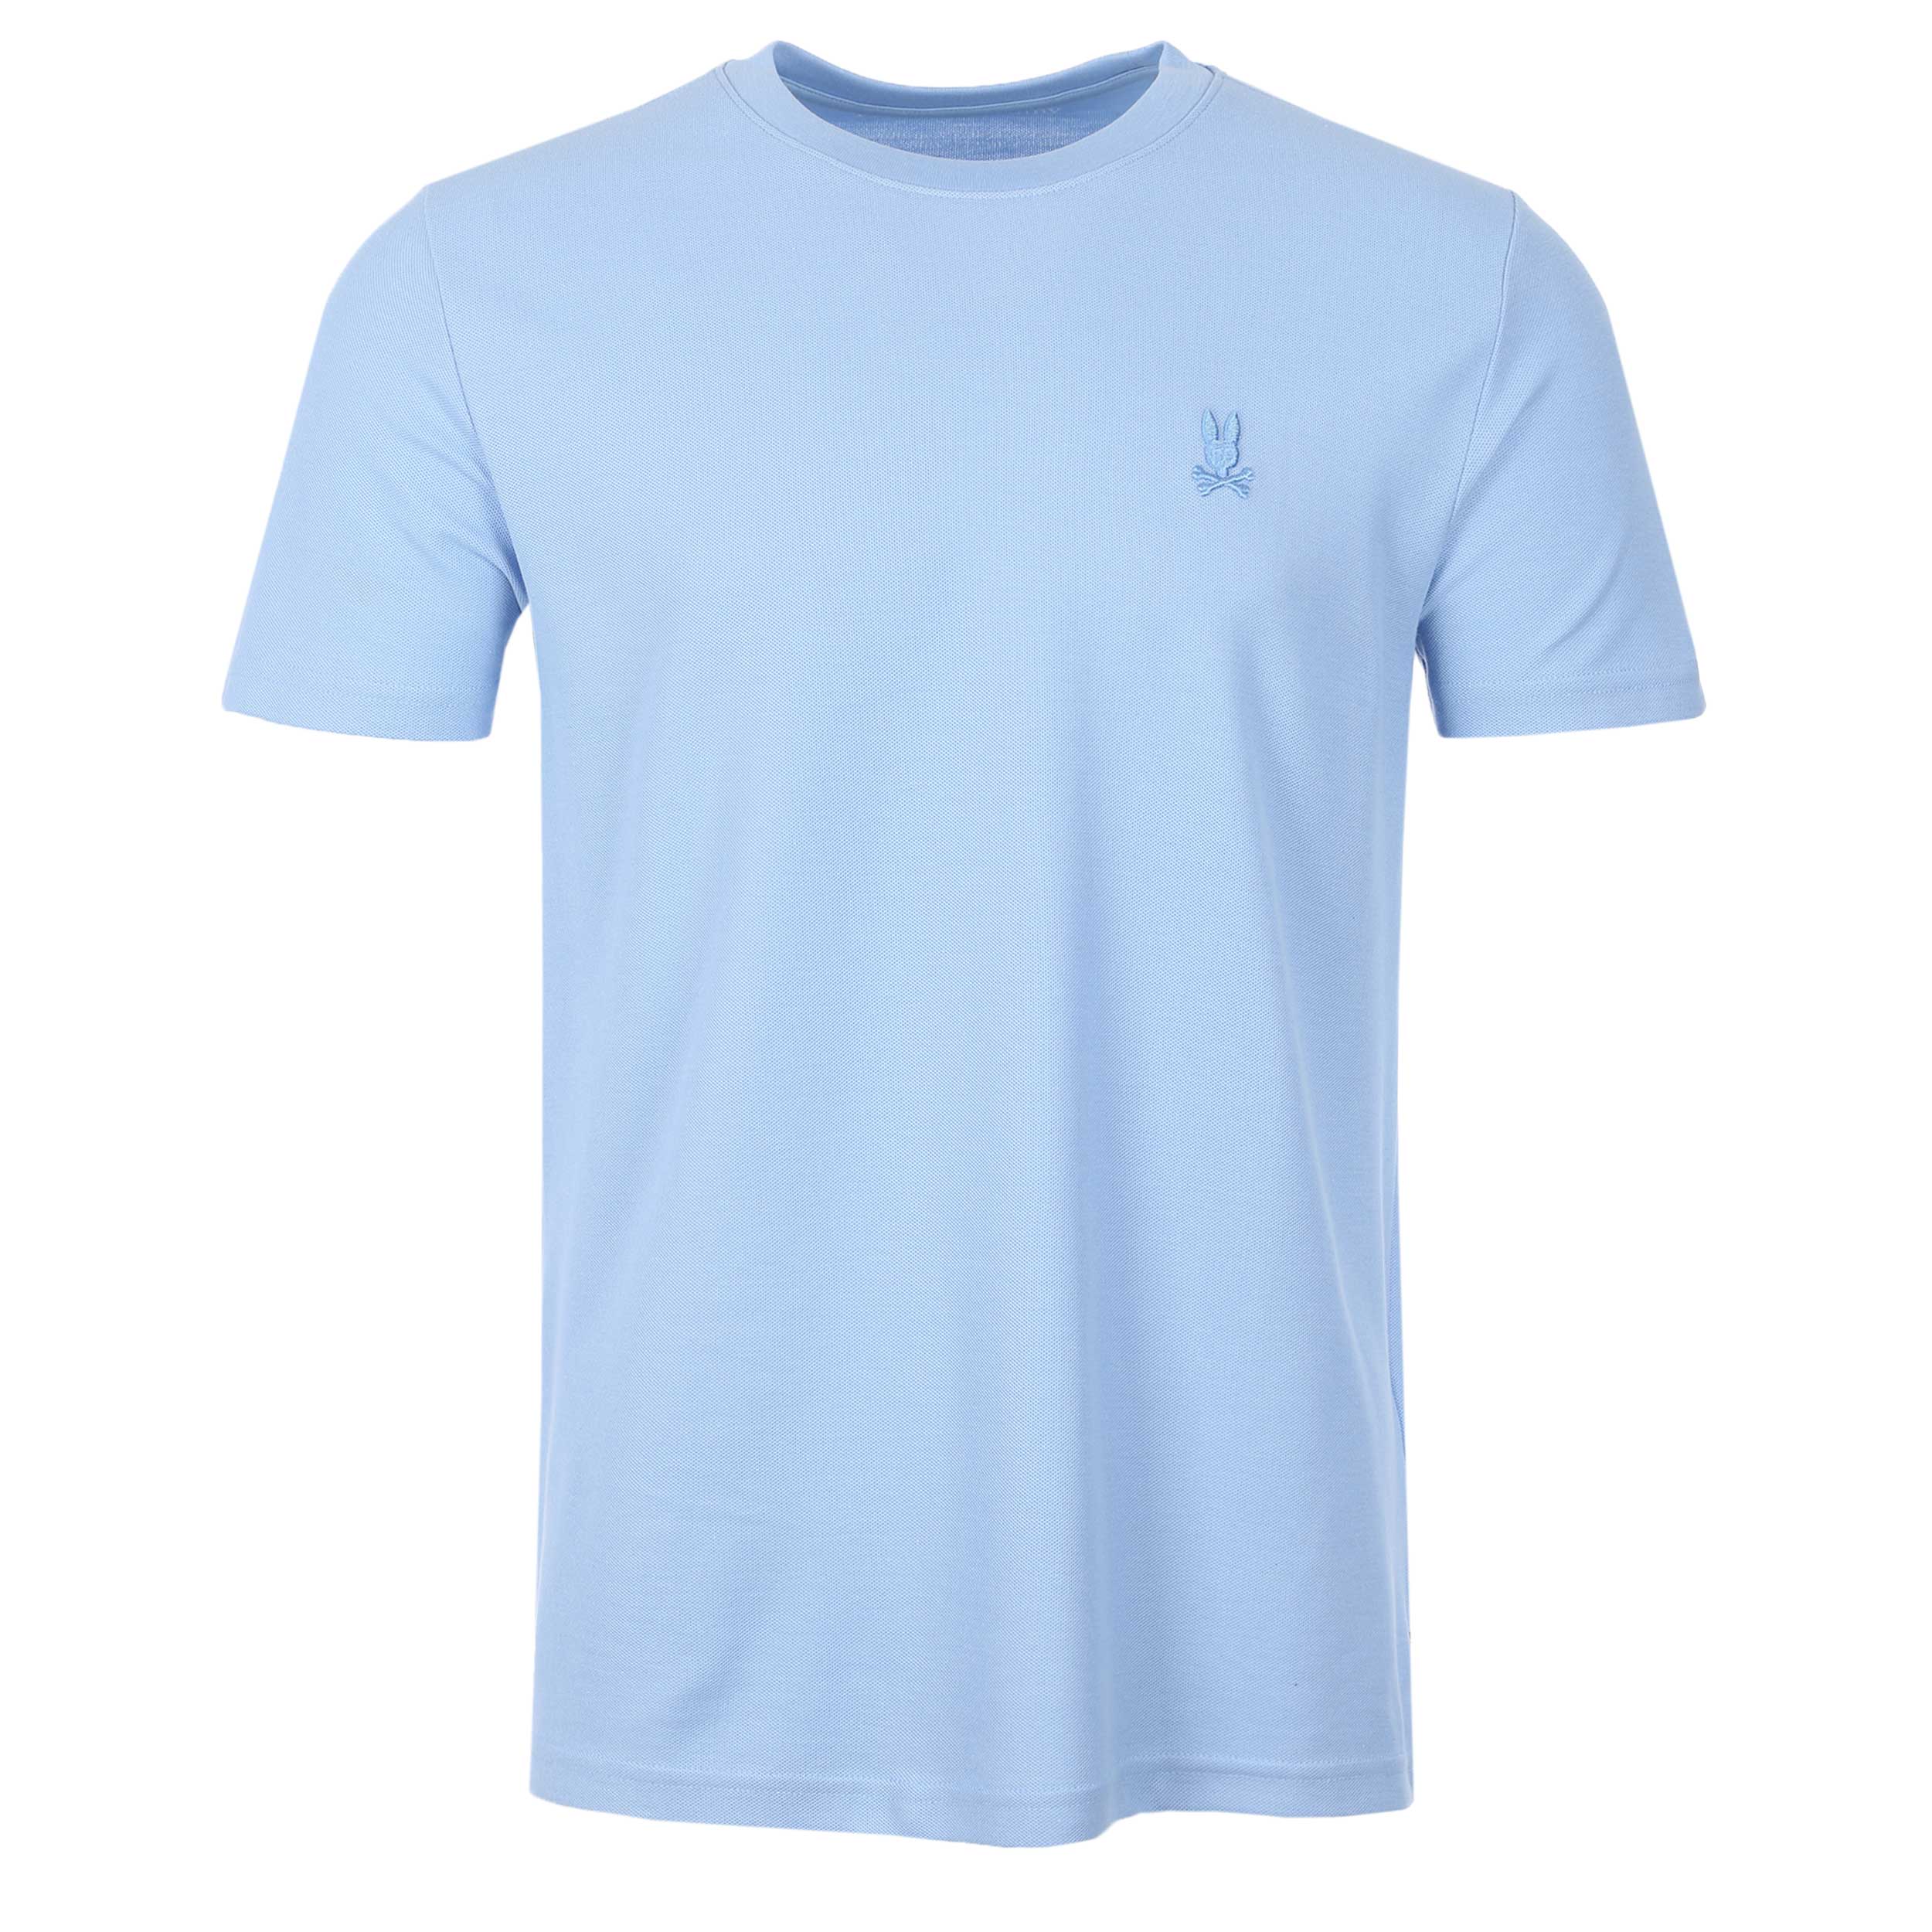 Psycho Bunny Stanford Pique T-Shirt in Serenity Sky Blue